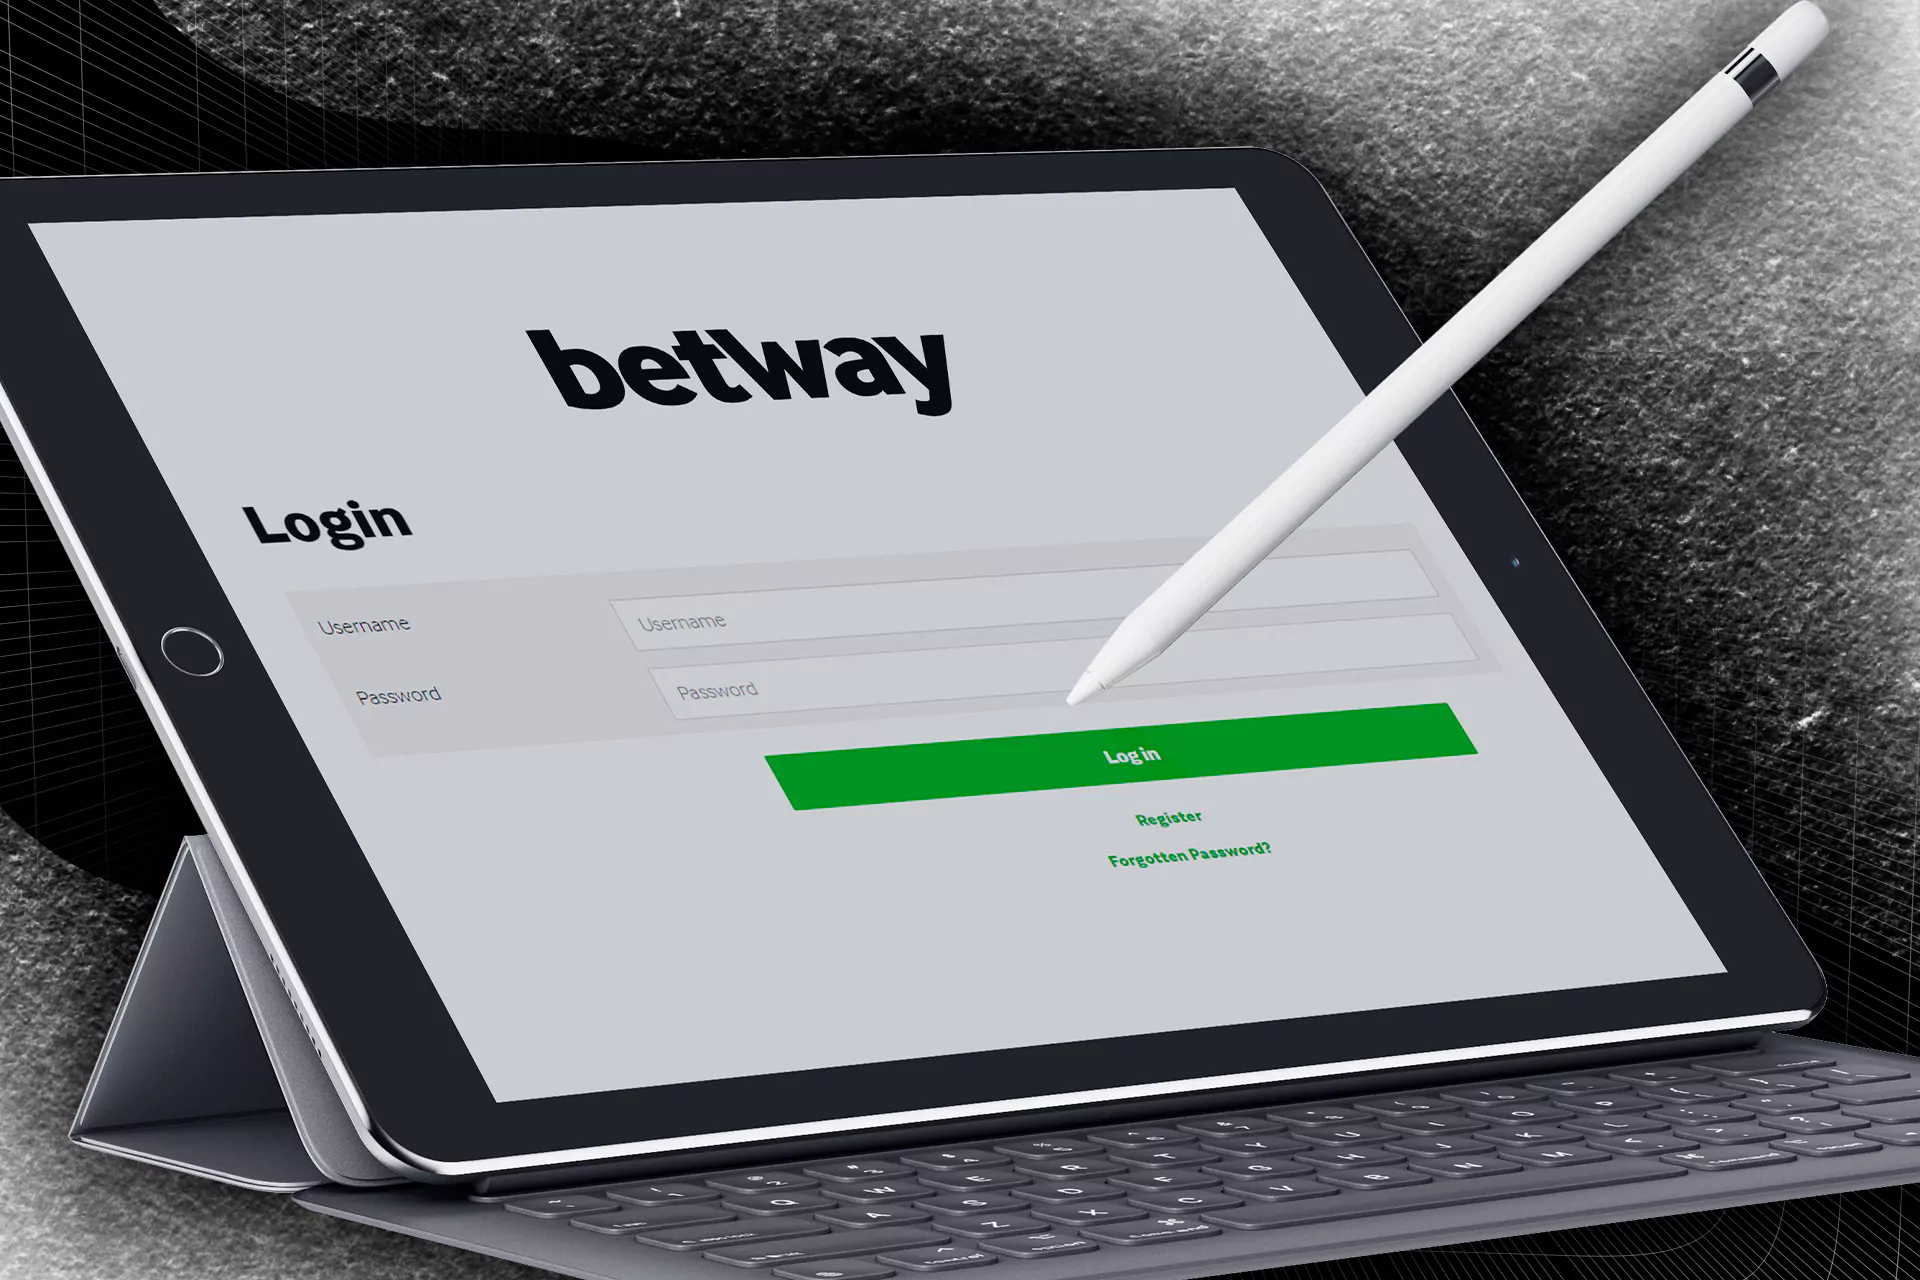 Log in to your Betway account to start betting,